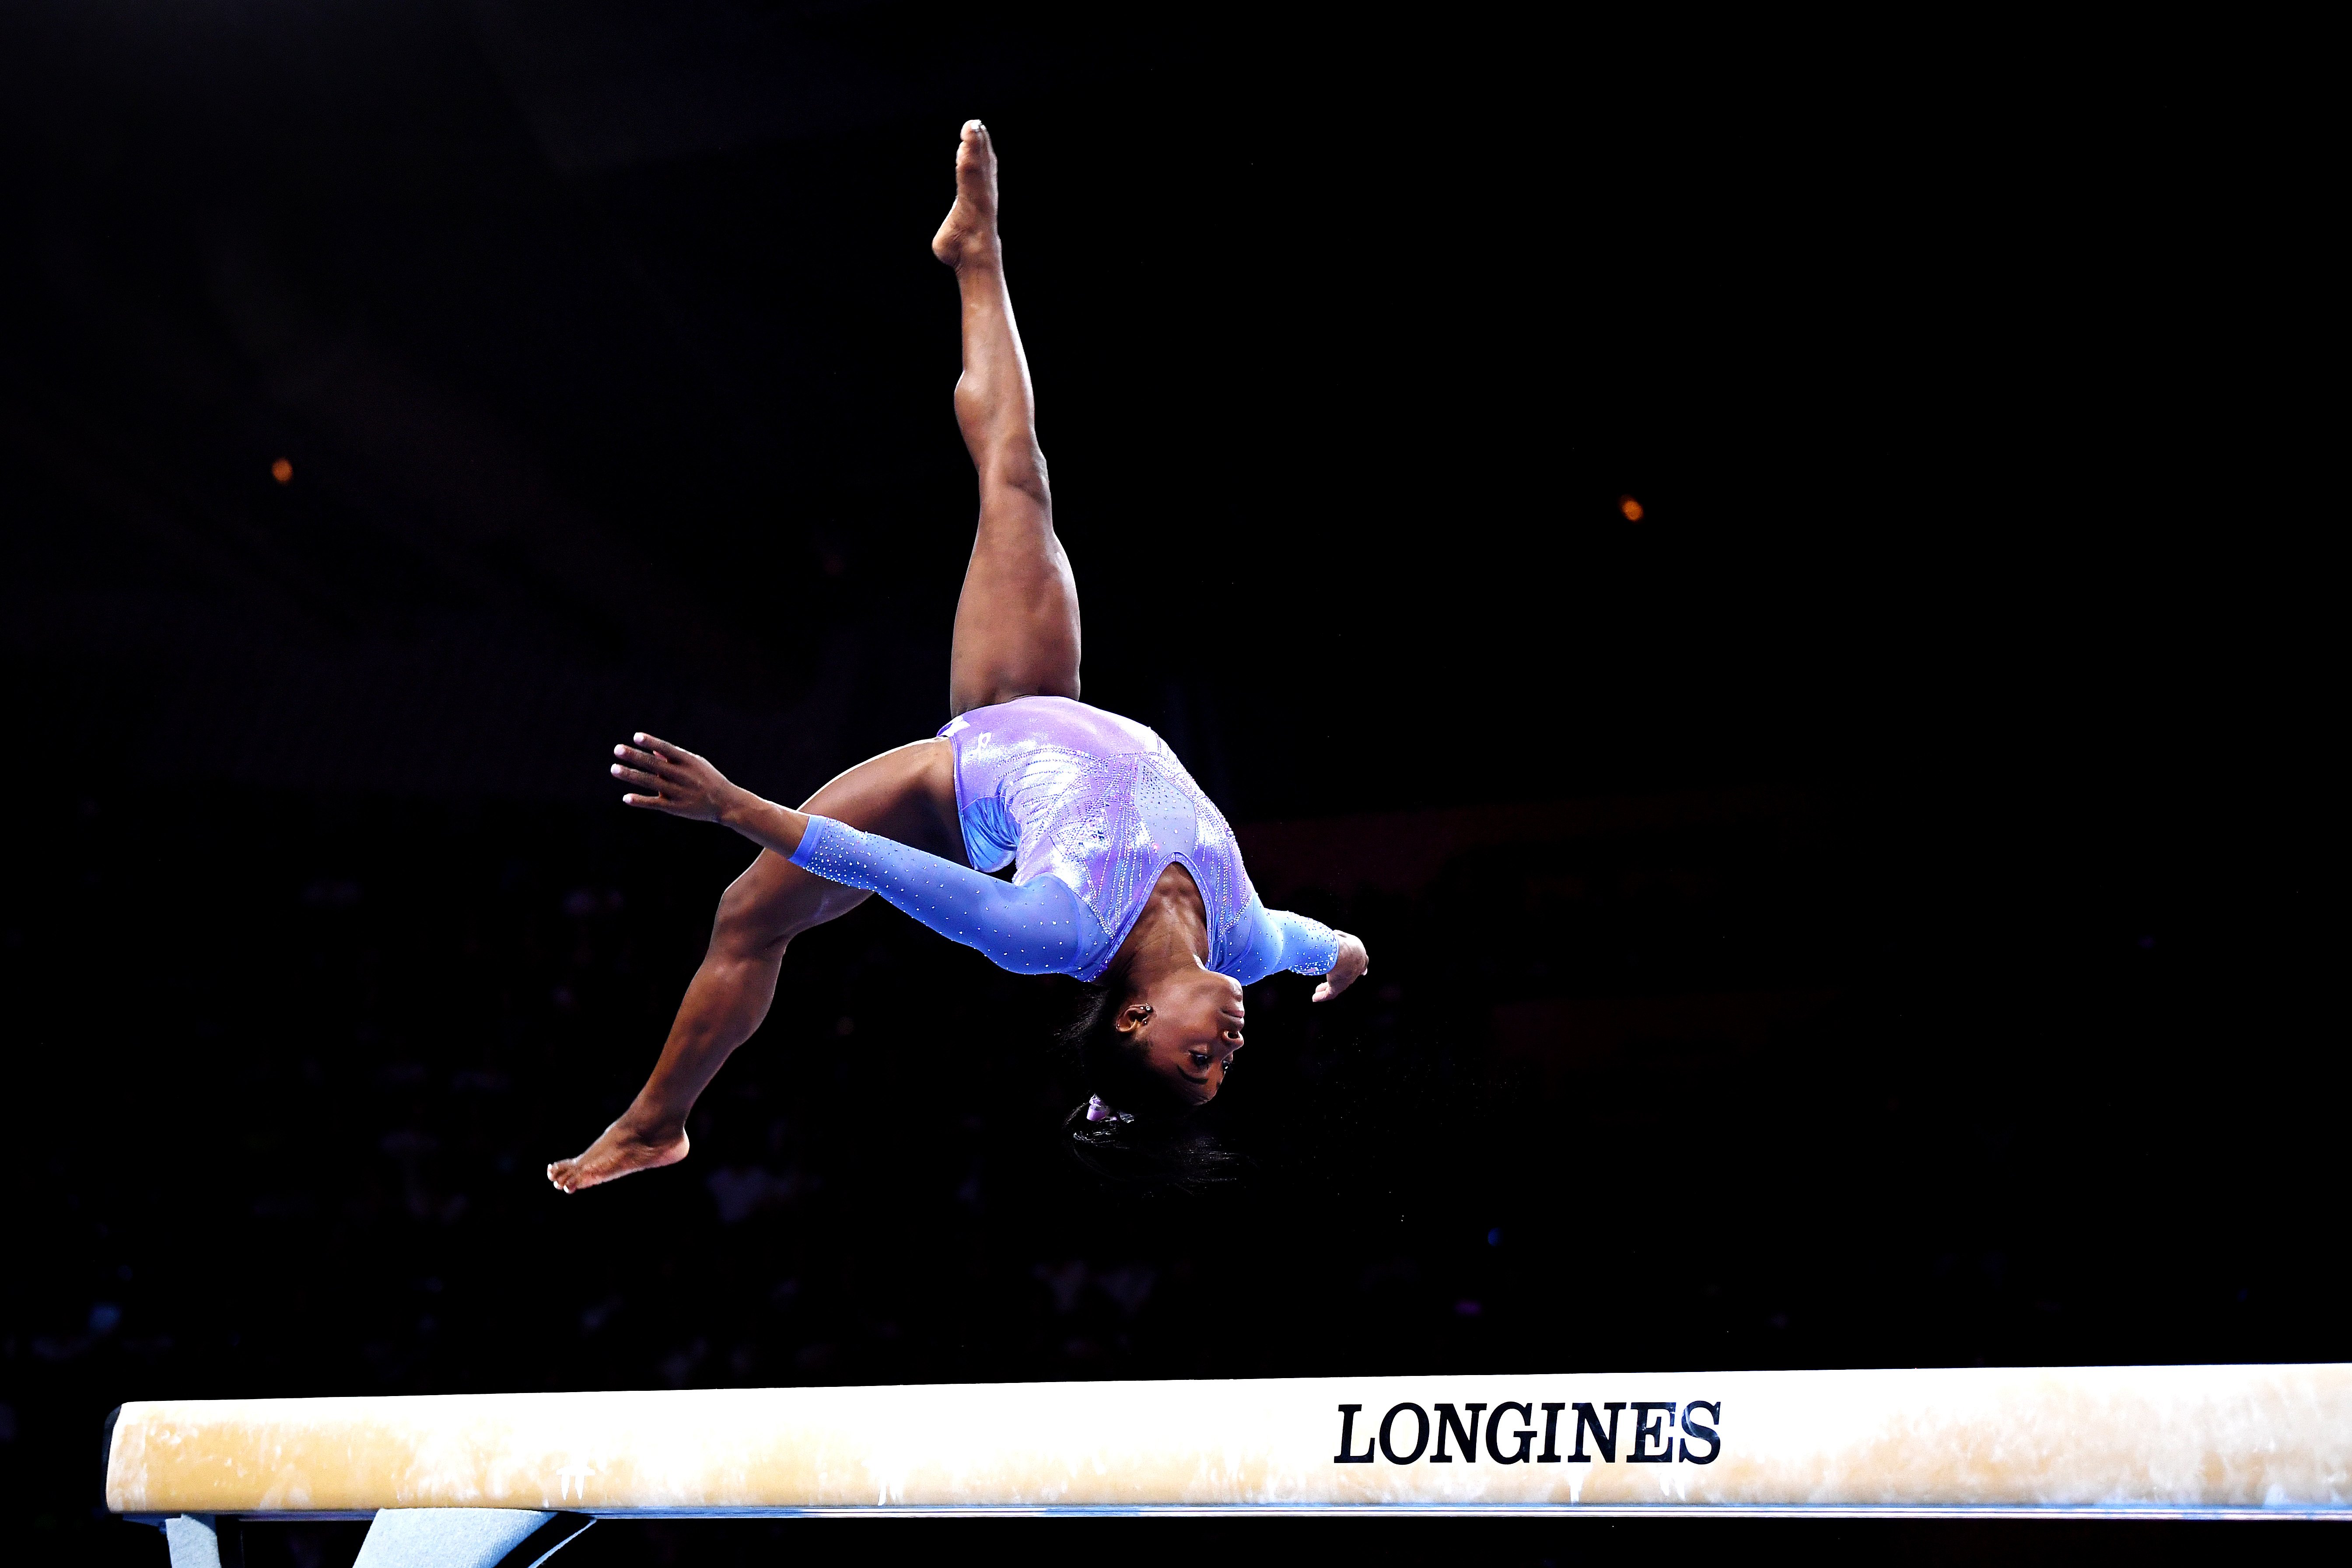 Simone Biles competes the the 49th FIG Artistic Gymnastics World Championships on October 13, 2019 in Stuttgart, Germany. | Source: Getty Images